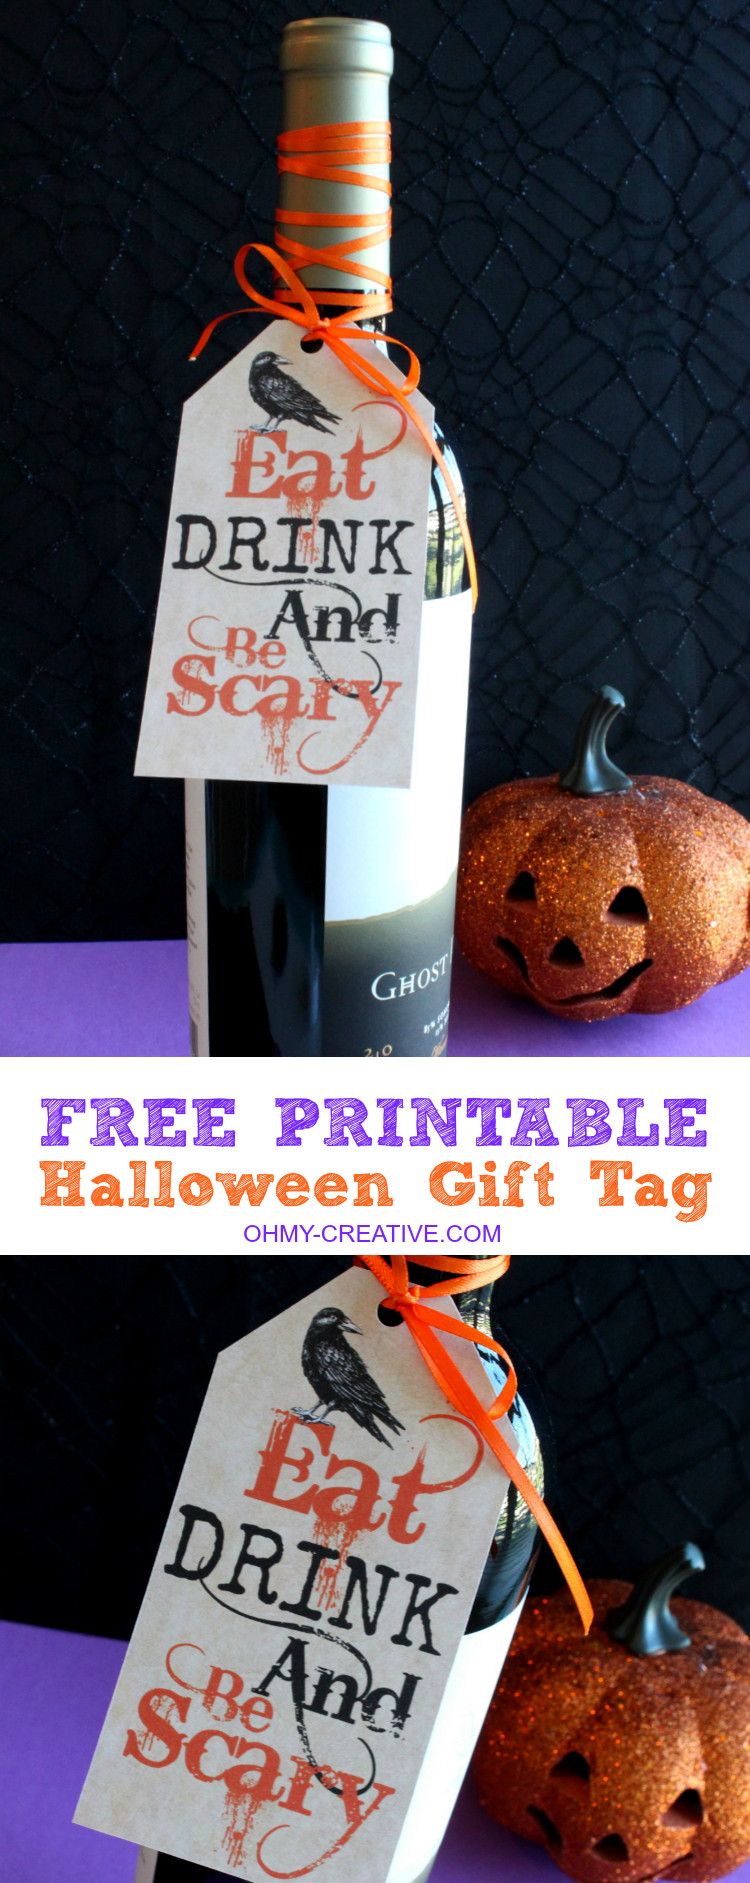 Halloween Party Gift Ideas
 Eat Drink and Be Scary Free Printable Halloween Gift Tag